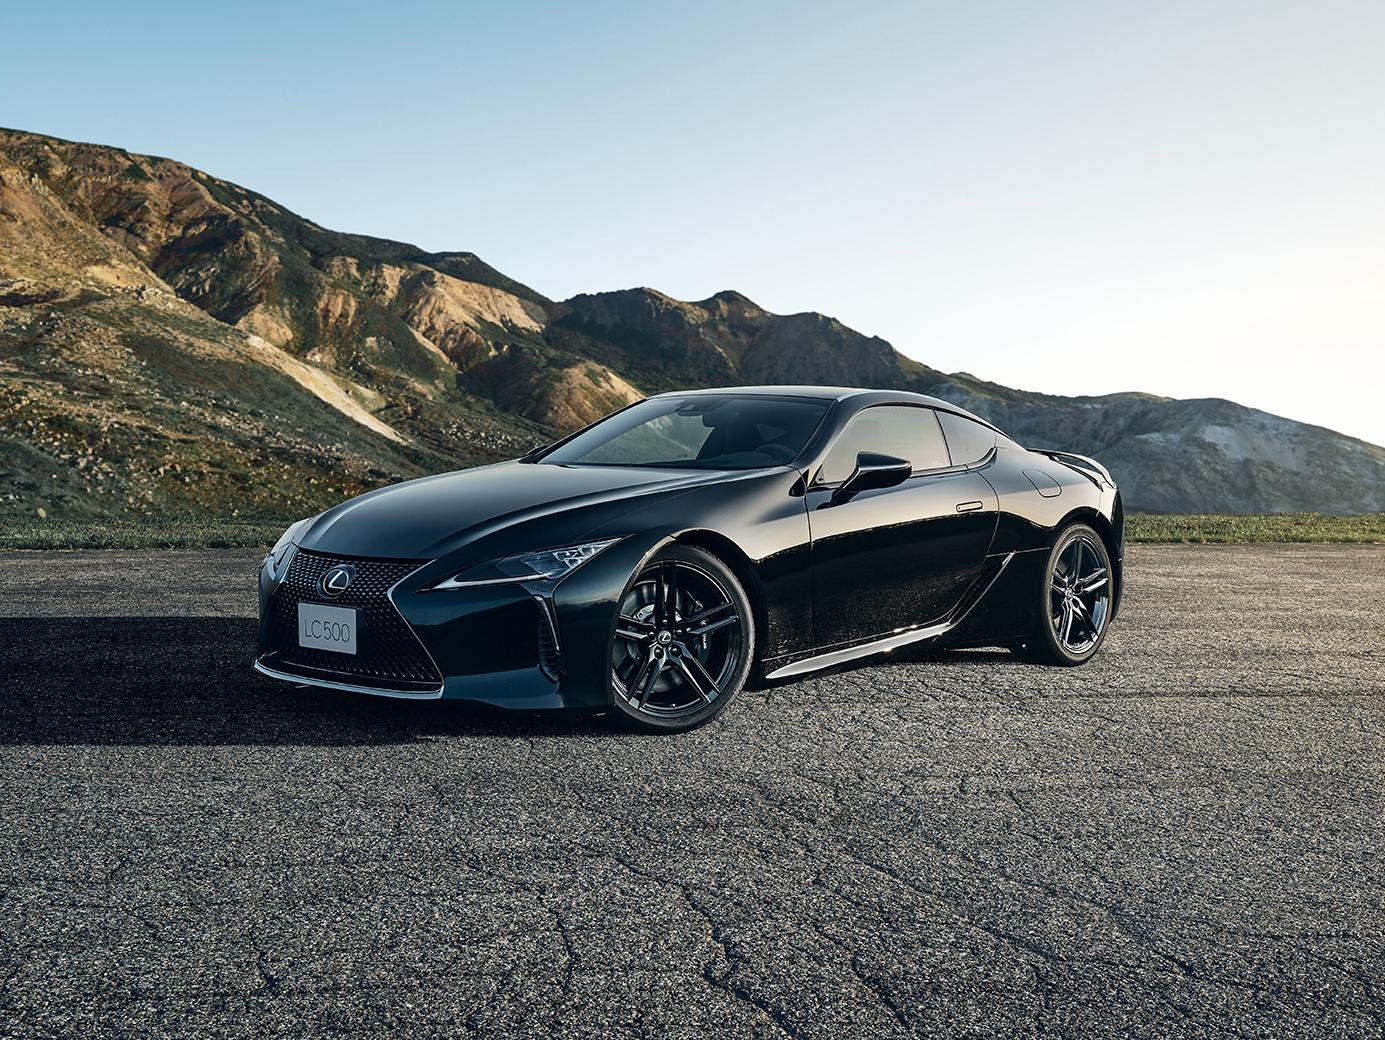 The 2021 Lexus LC 500 Inspiration Series turns the car into a stealthy black coupe.